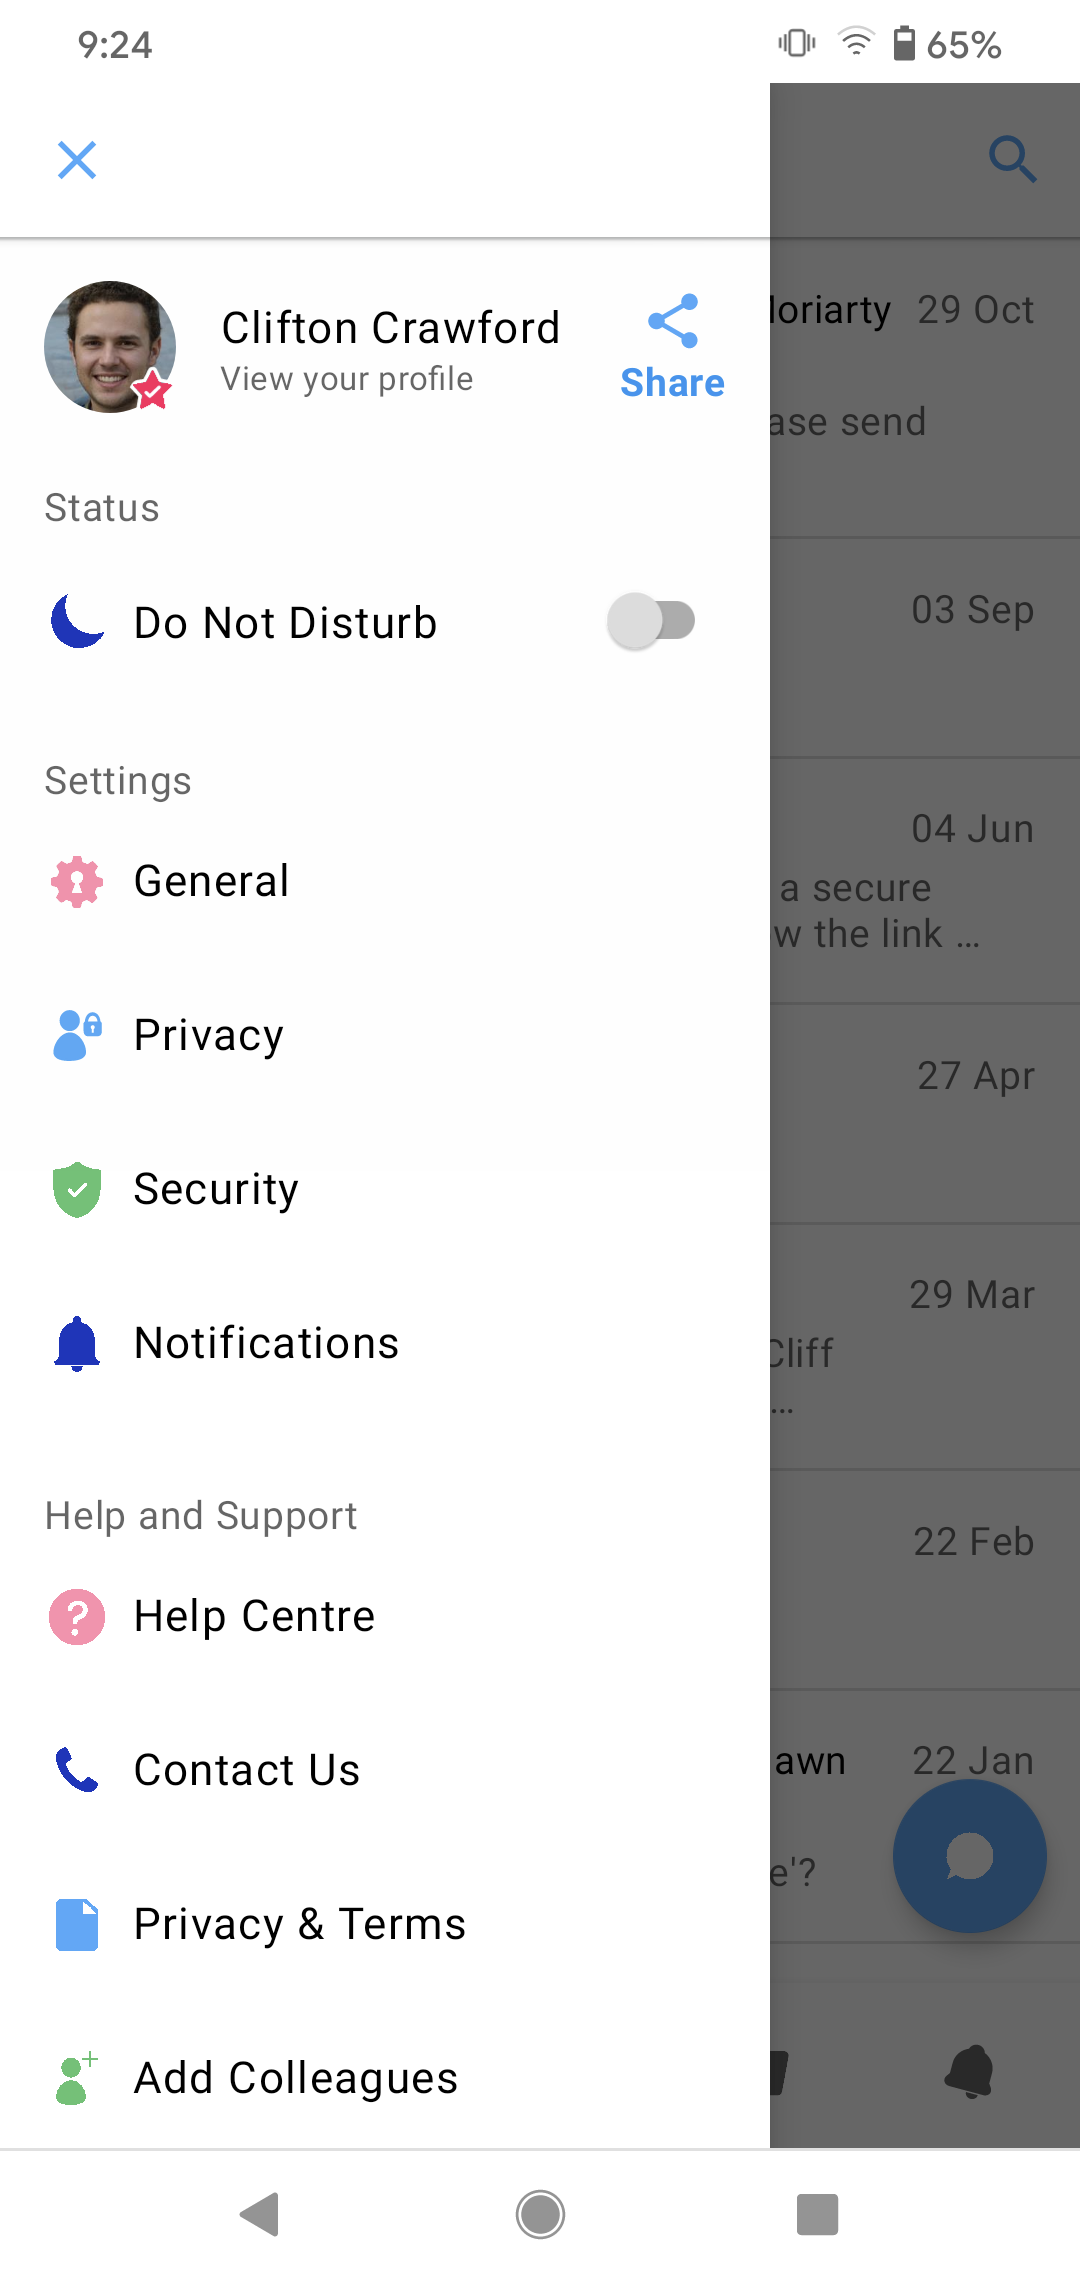 android-more-privacy_and_terms_button.png